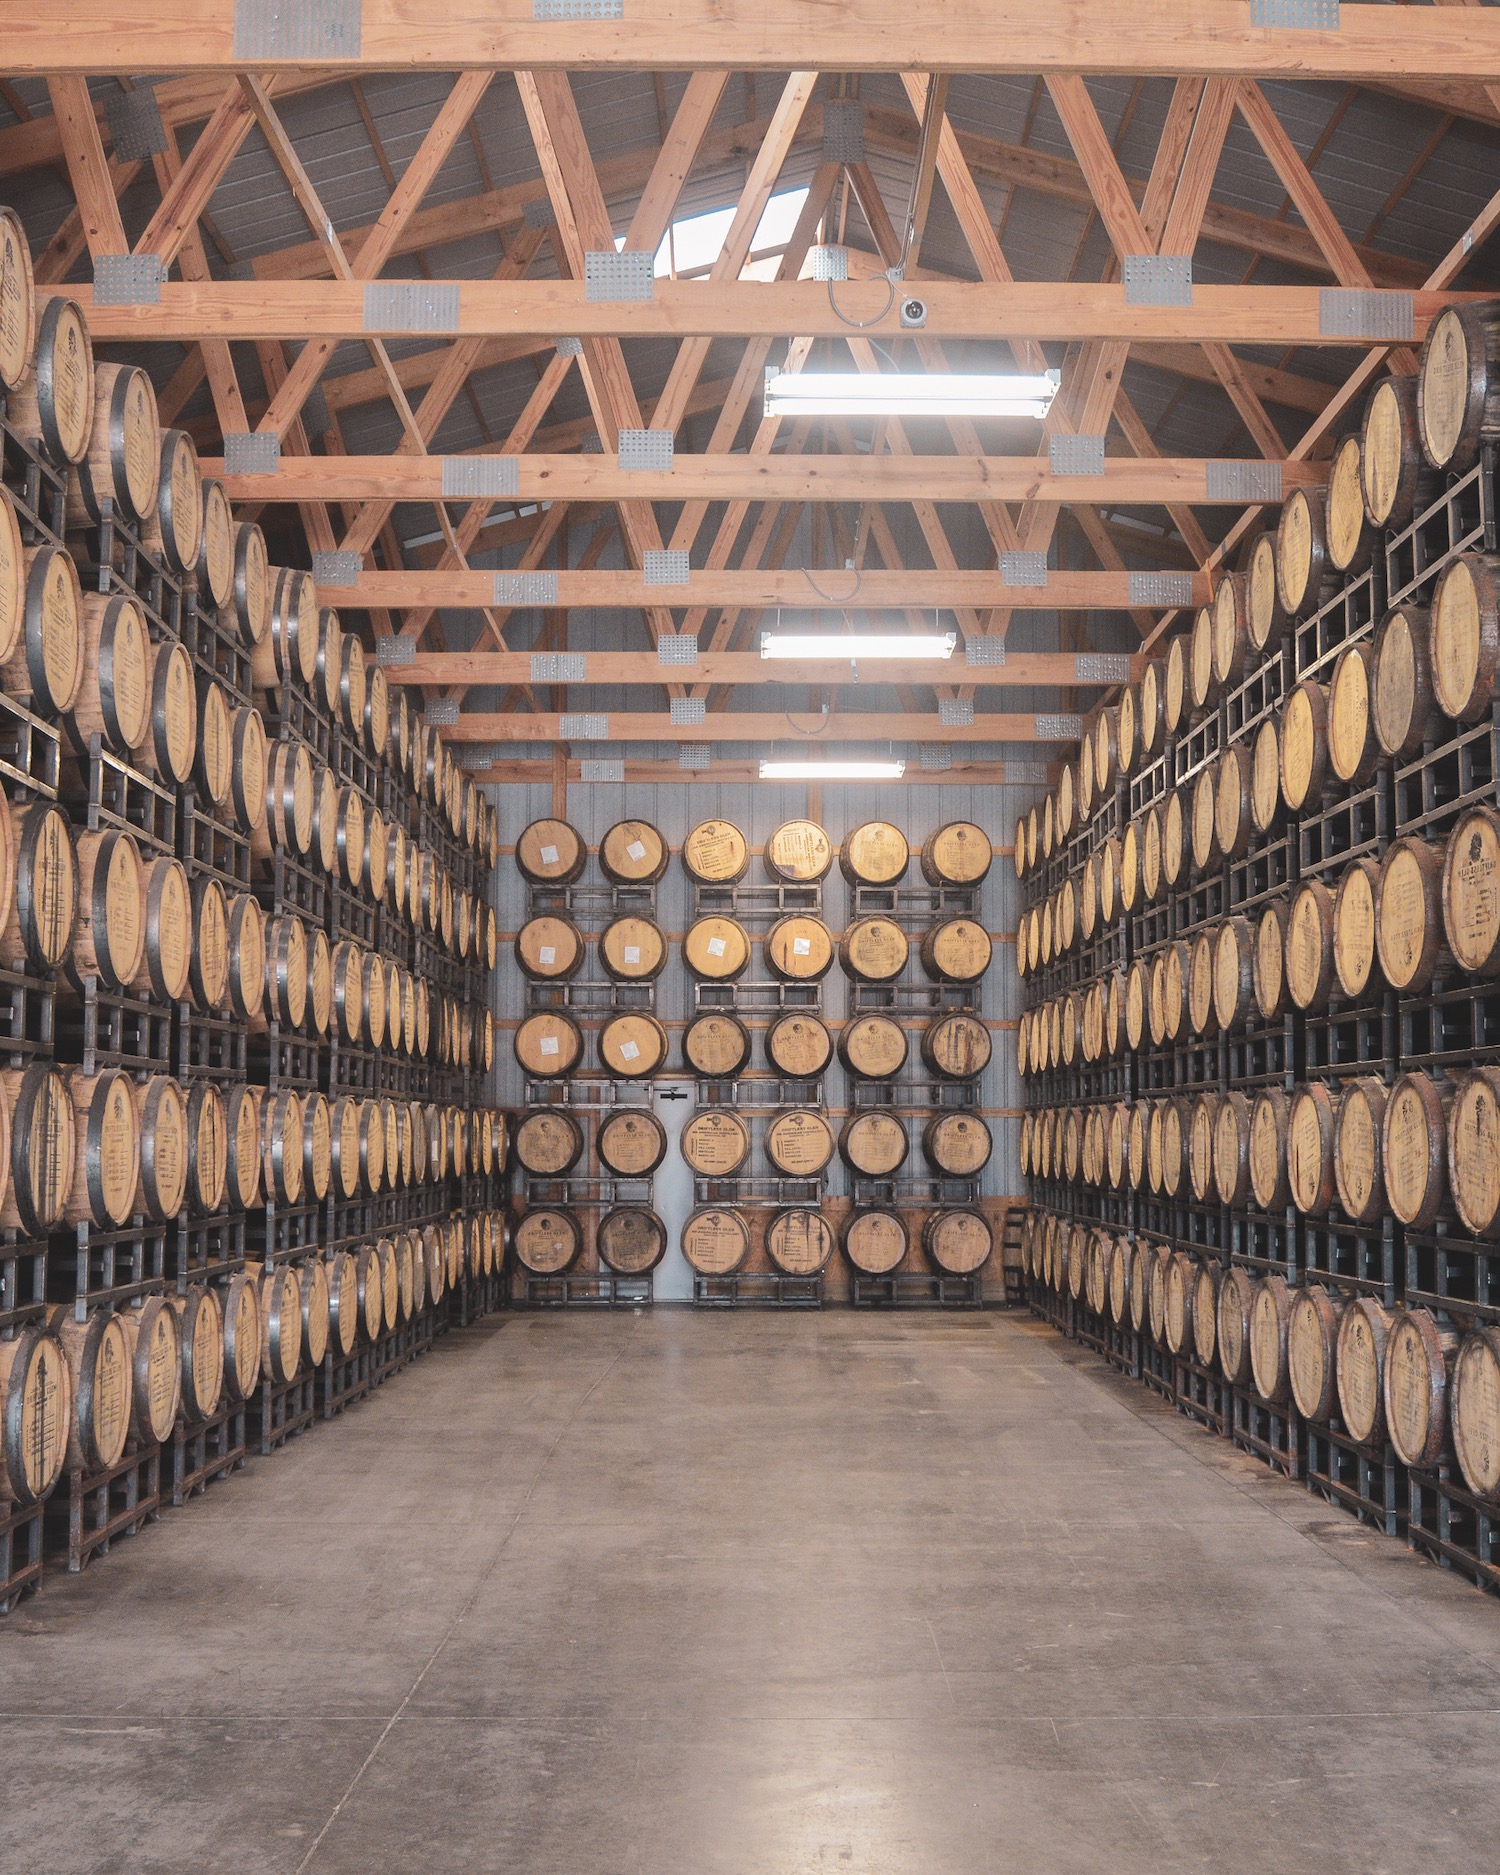 Our rackhouse with thousands of barrels